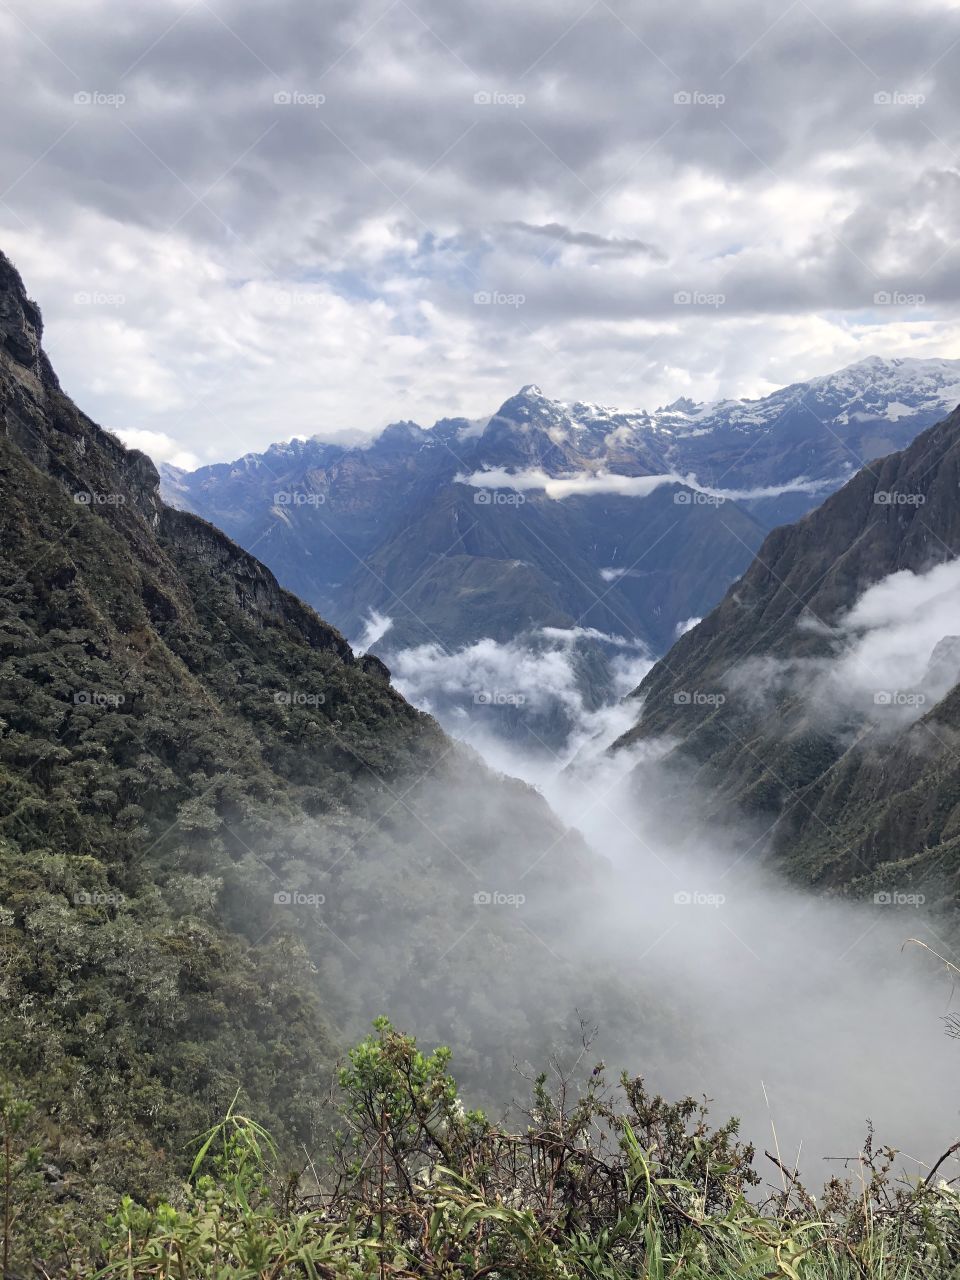 Peru Mountains front the Inca Trail 